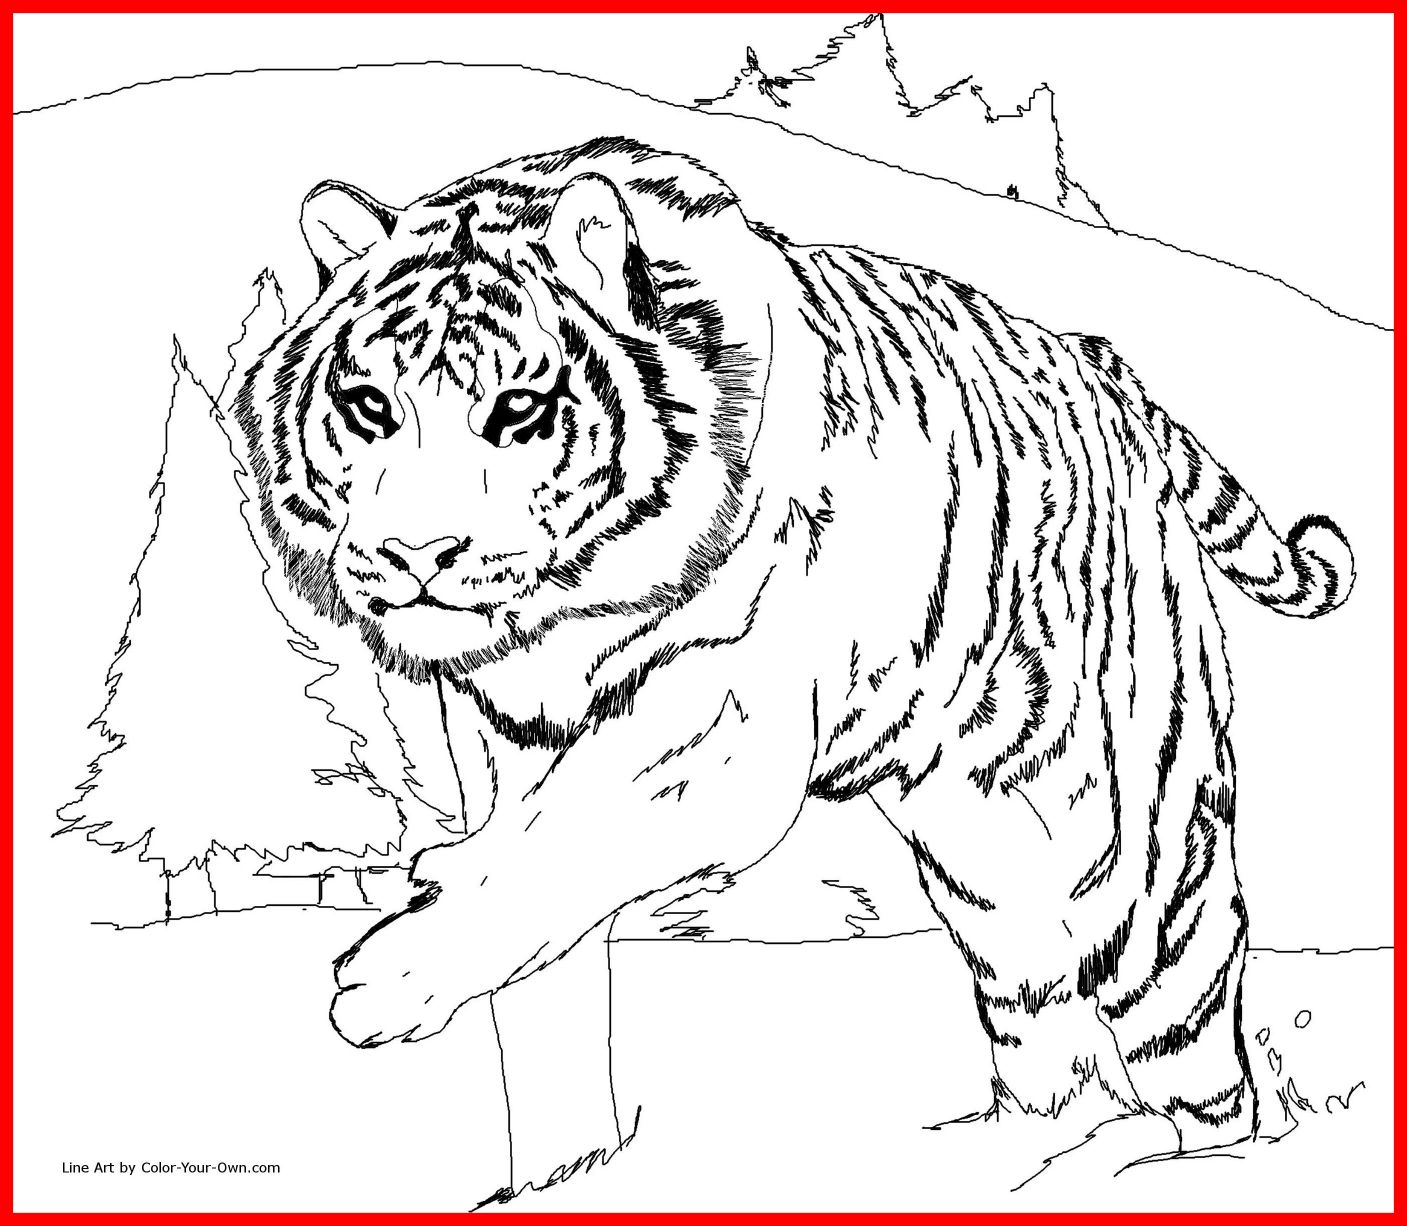 Chimpanzee Coloring Pages Orangutan Coloring Page At Getdrawings Free For Personal Use